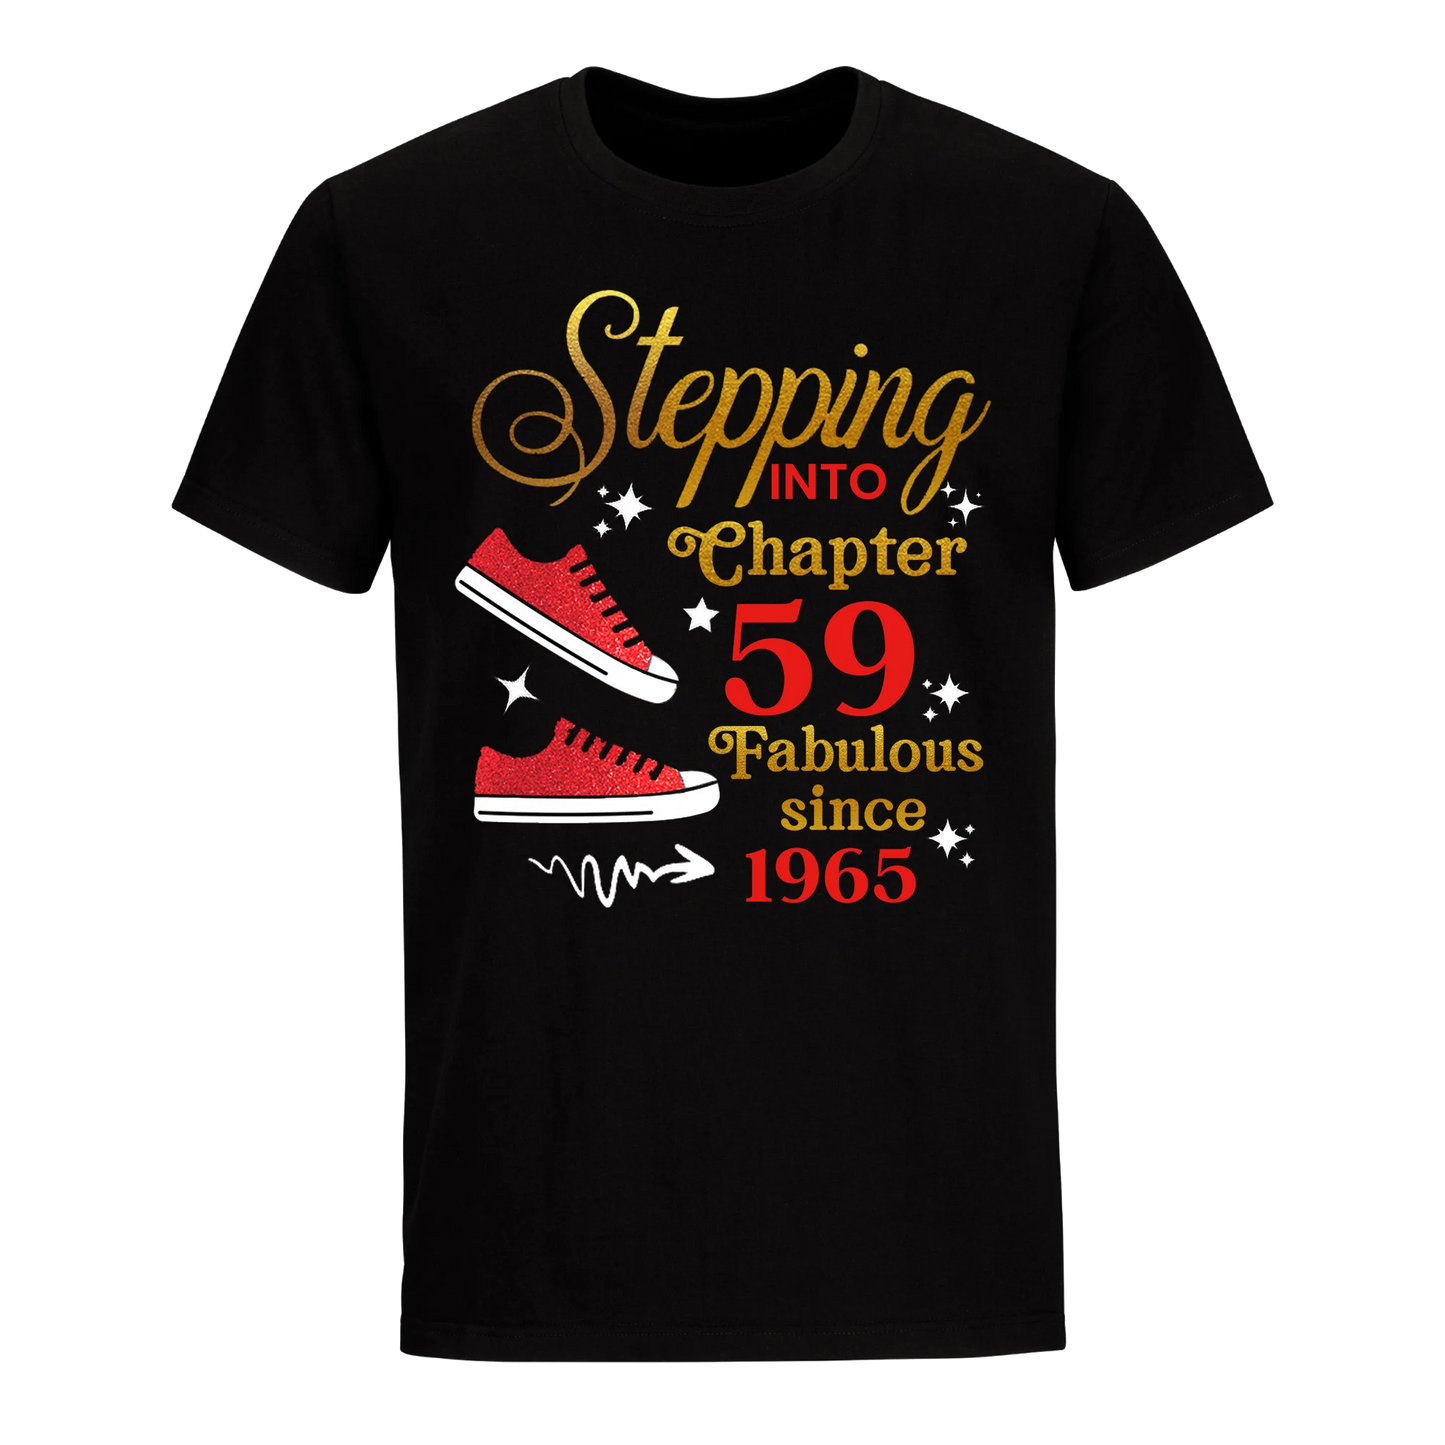 STEPPING CHAPTER 59TH FAB SINCE 1965 UNISEX SHIRT